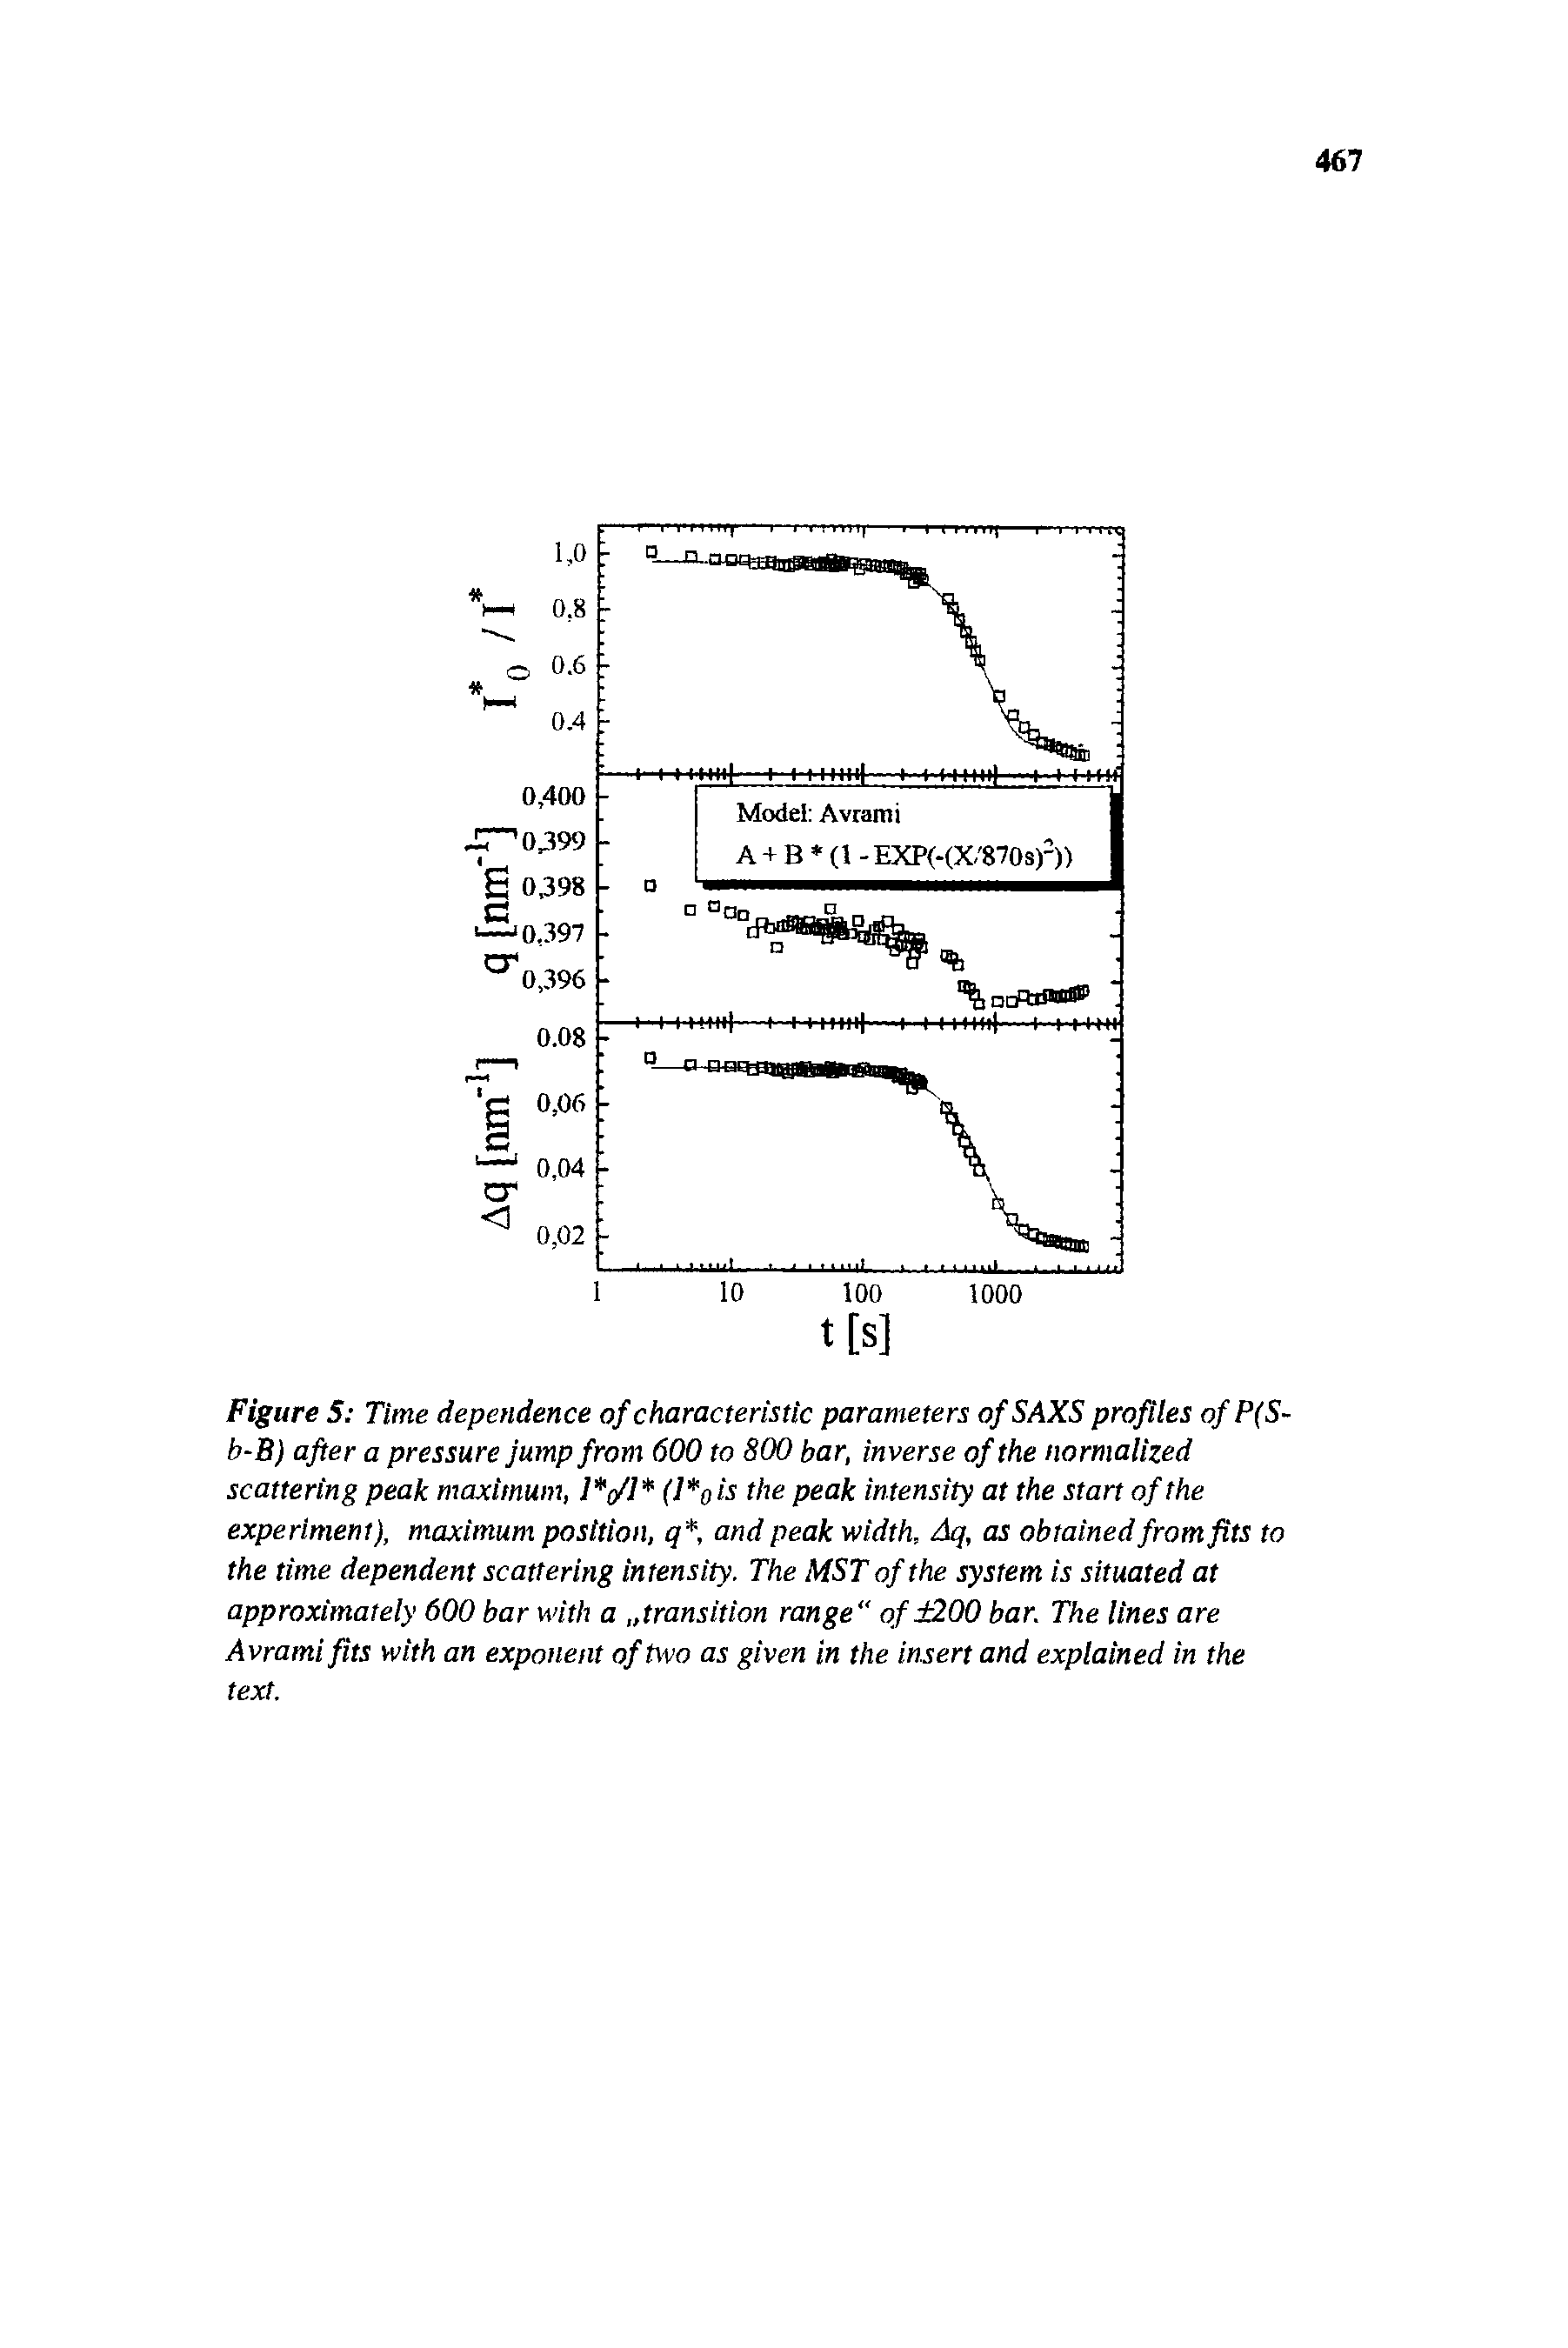 Figure 5 Time dependence of characteristic parameters ofSAXS profiles ofP(S-b-B) after a pressure jump from 600 to 800 bar, inverse of the normalized scattering peak maximum, (/ (l ois the peak intensity at the start of the experiment), maximum position, q, and peak width, Aq, as obtained from fits to the time dependent scattering intensity. The MST of the system is situated at approximately 600 bar with a transition range" of 200 bar. The lines are Avramiflts with an exponent of two as given in the insert and explained in the text.